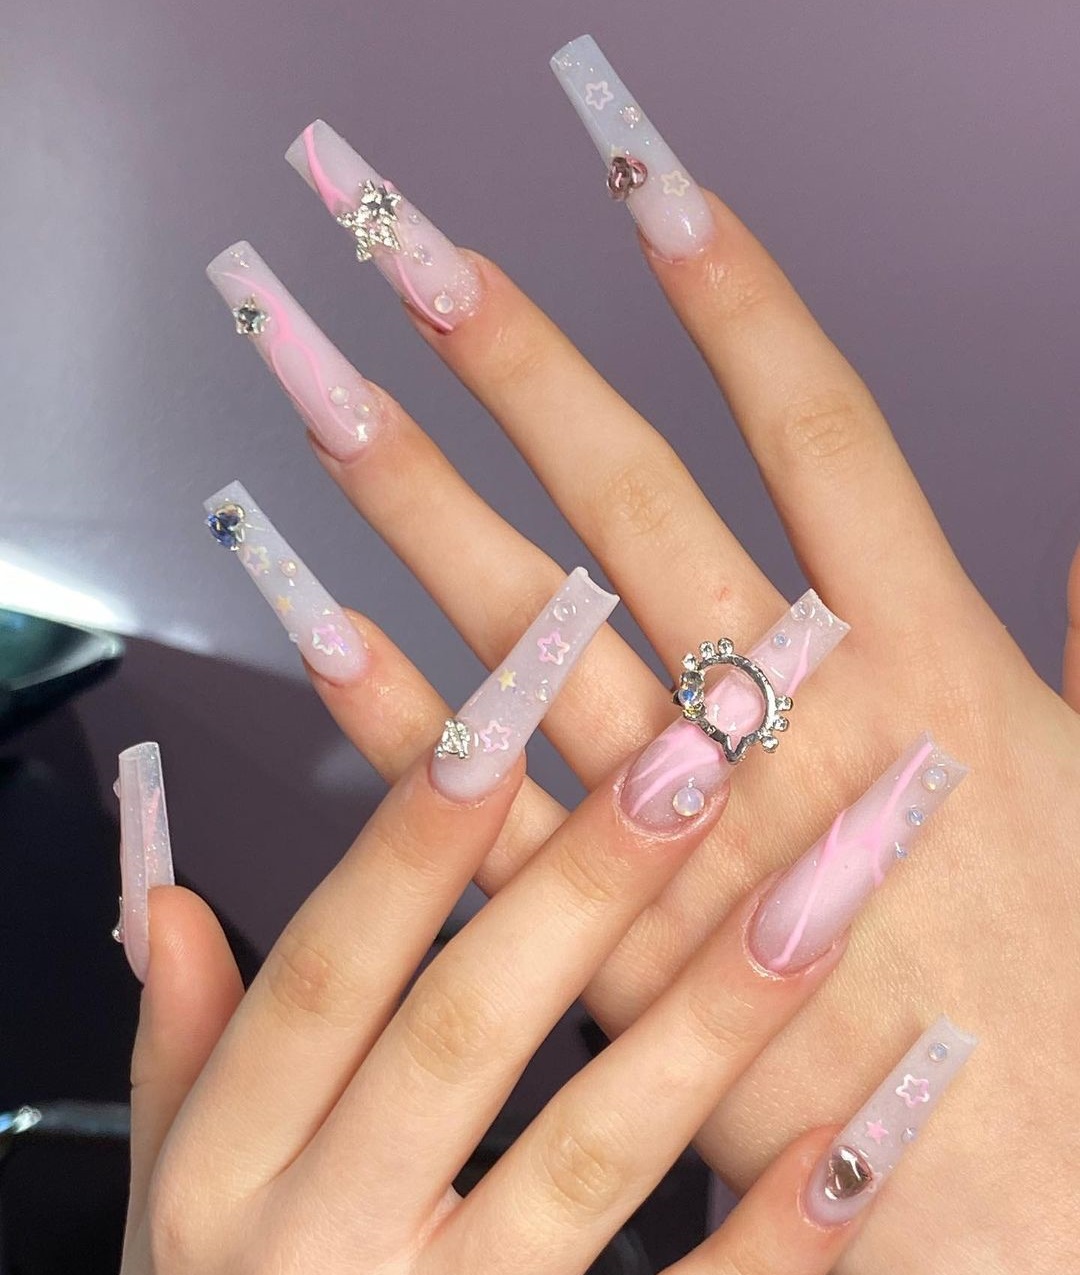 Nails Before Males! Try Clear Gel Nails For A Sparkly, Shiny Manicure  You'll Want To Show Off – Lipstiq.com